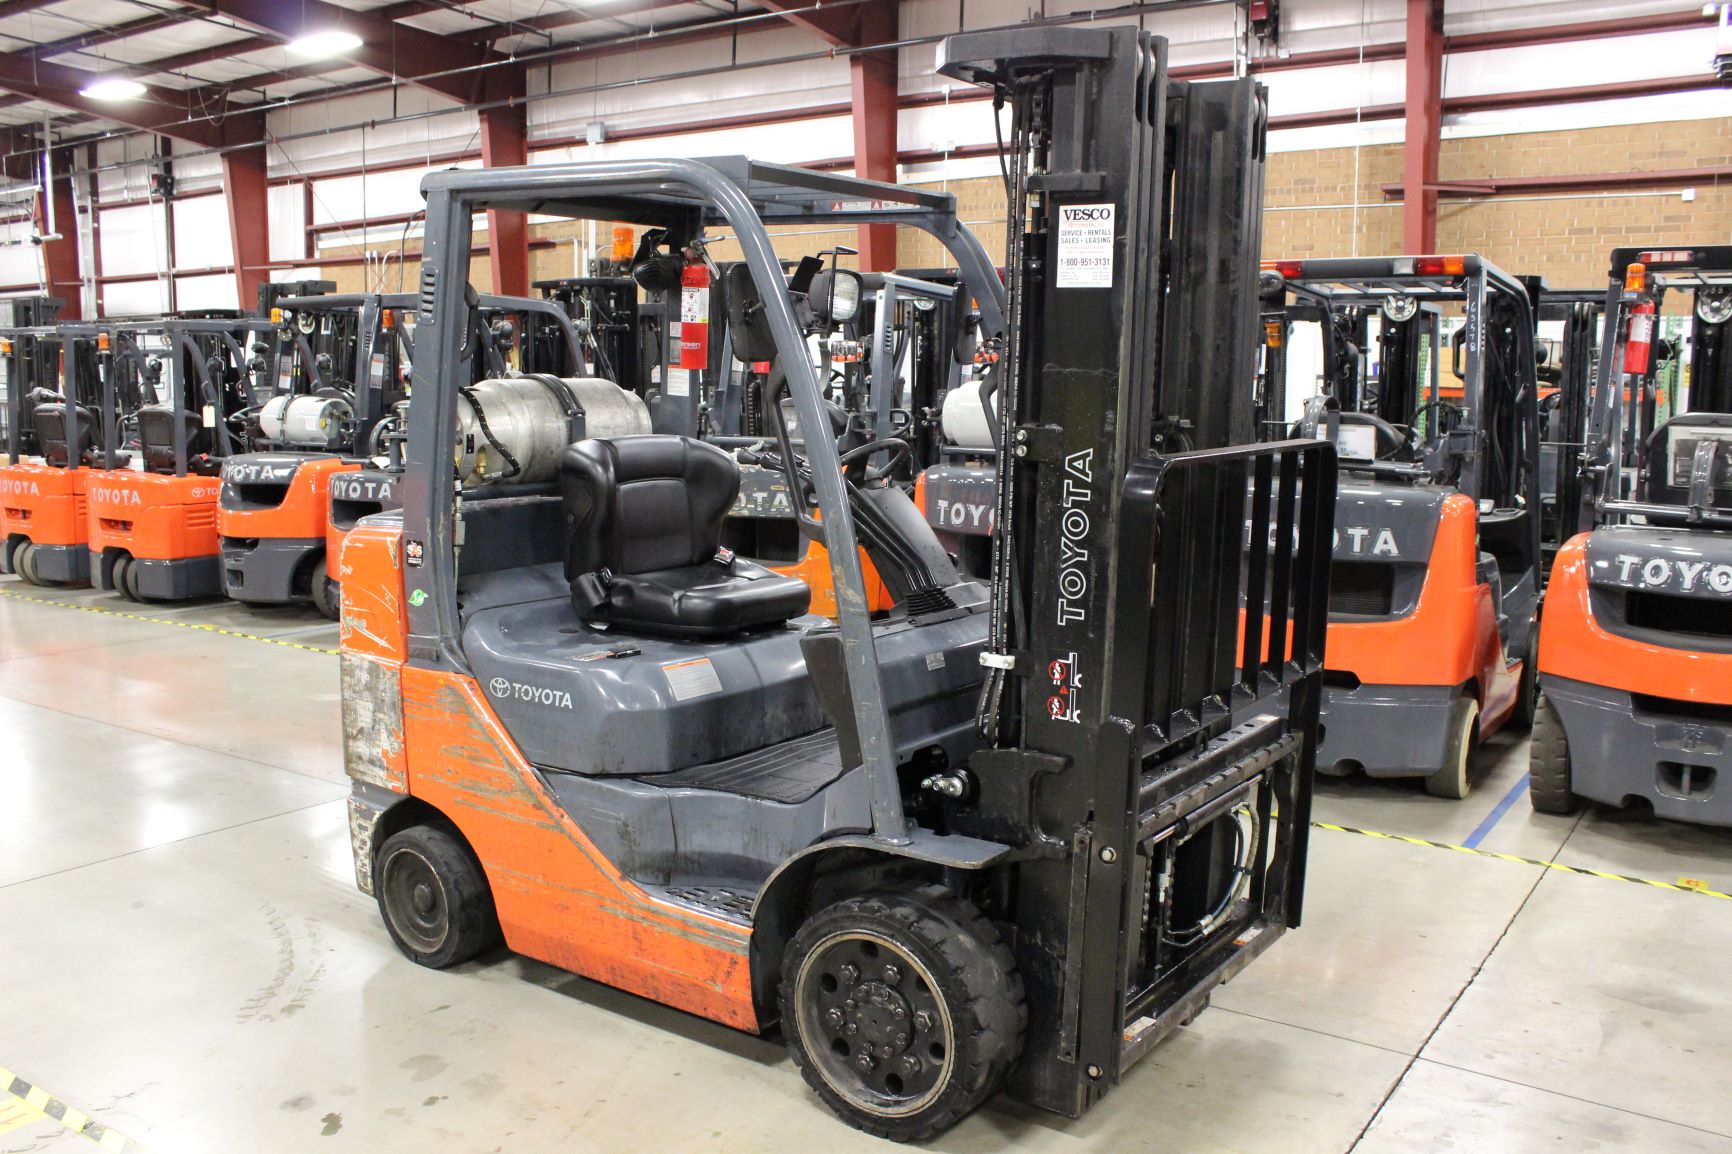 Used Forklifts In Statesville Asheville Hickory North Carolina Vesco Toyotalift